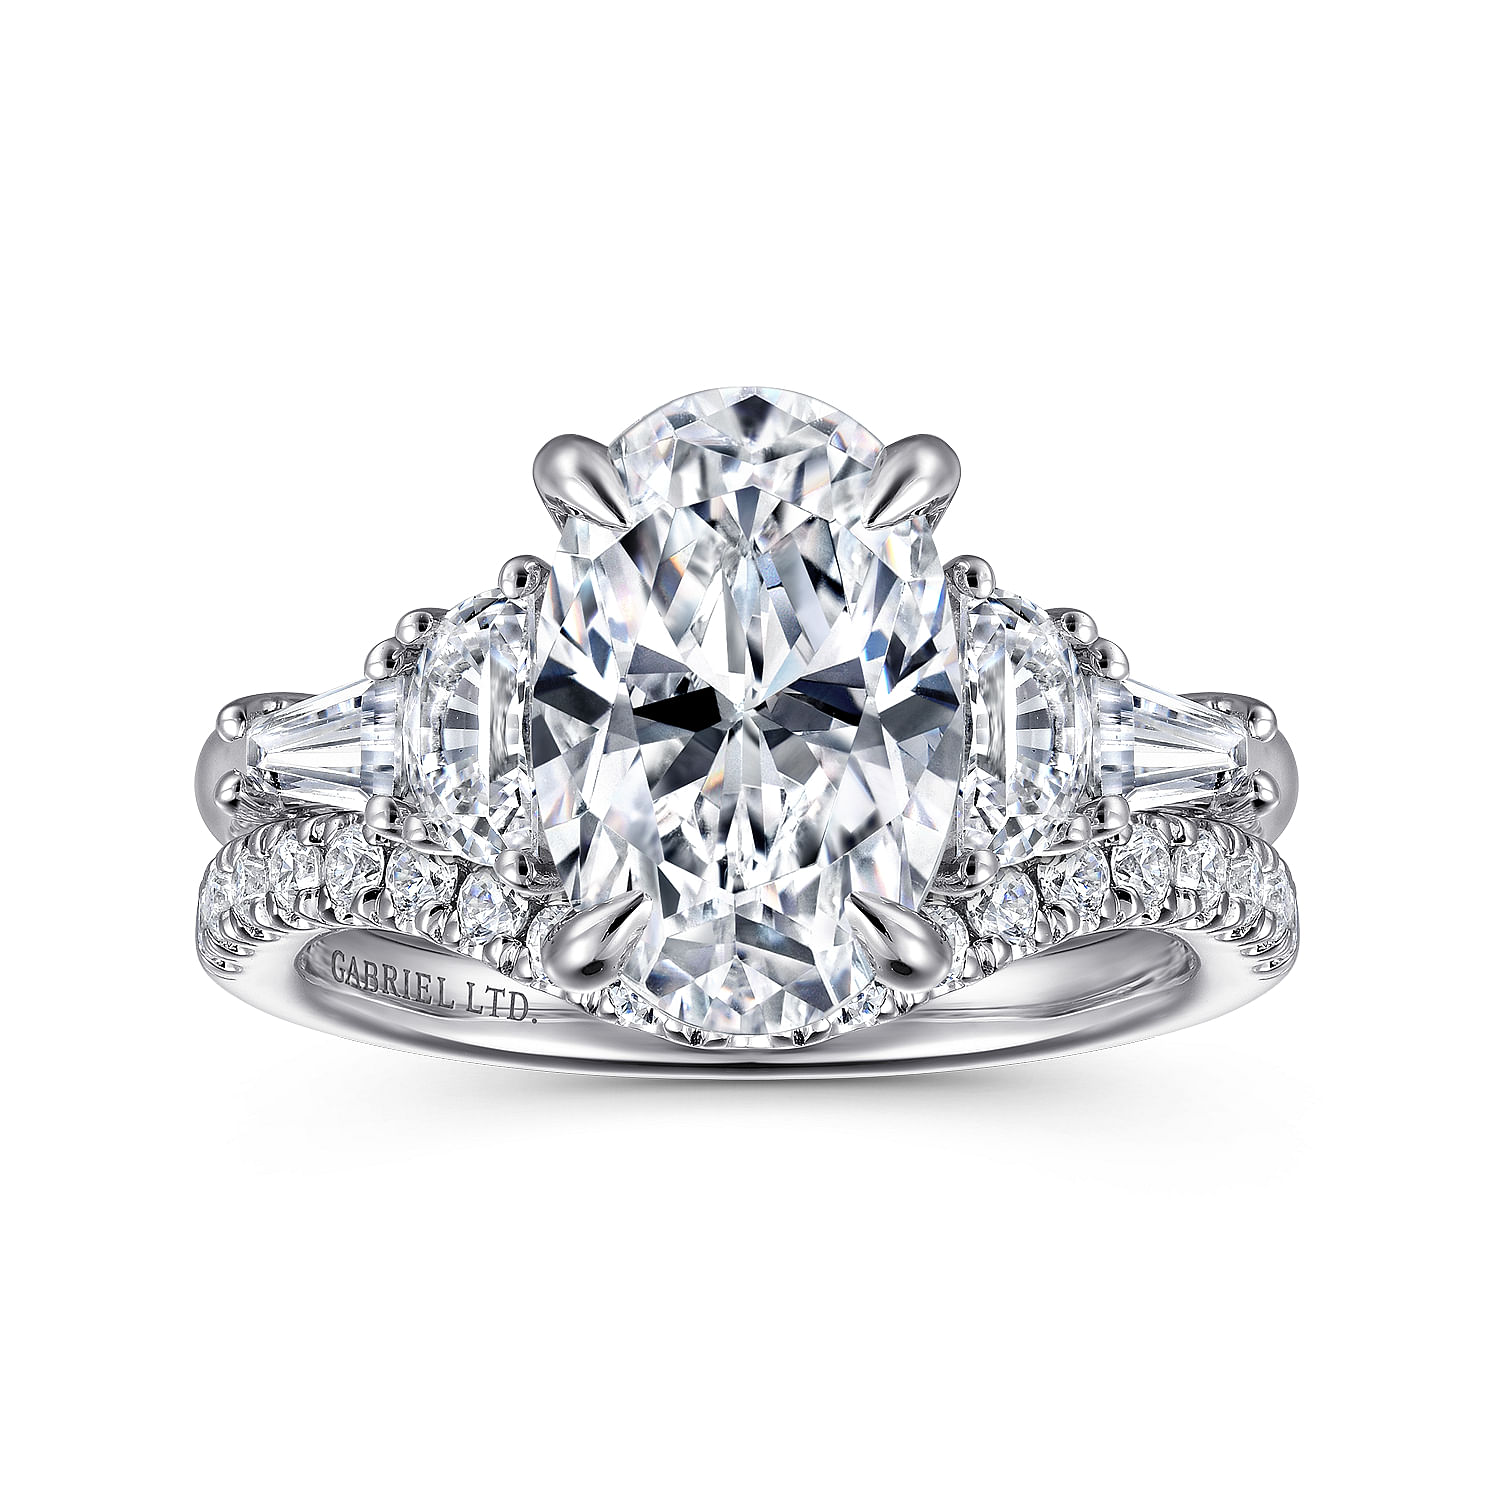 18K White Gold Oval Cut Five Stone Diamond Engagement Ring